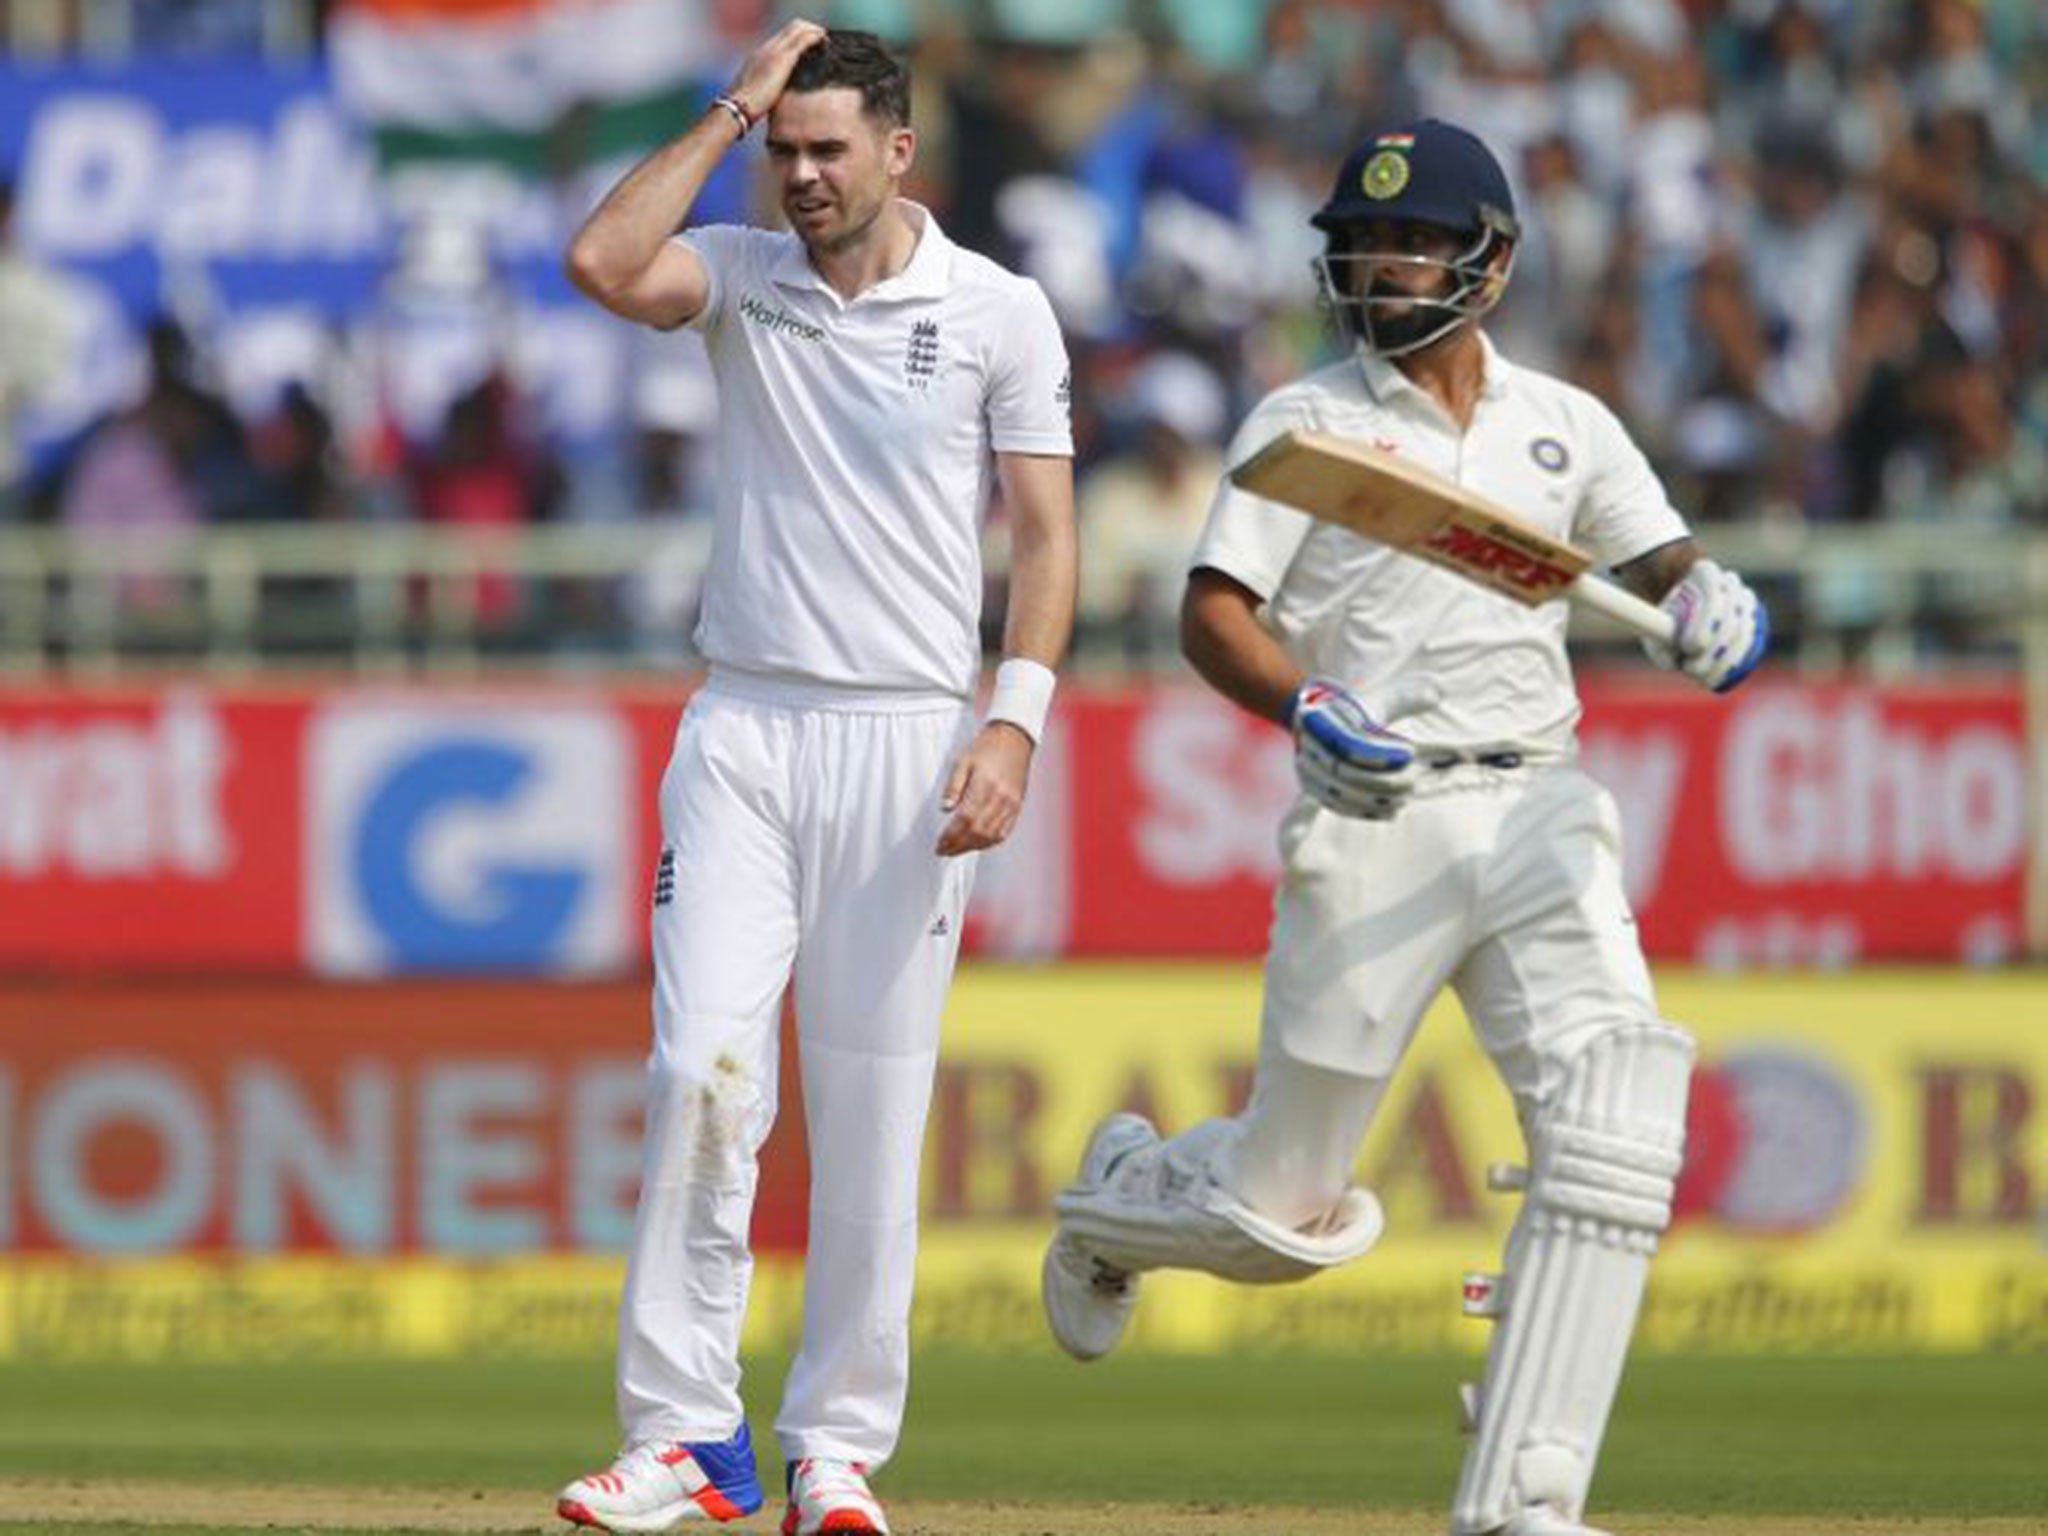 Virat Kohli frustrated Anderson as he helped India build their first innings score